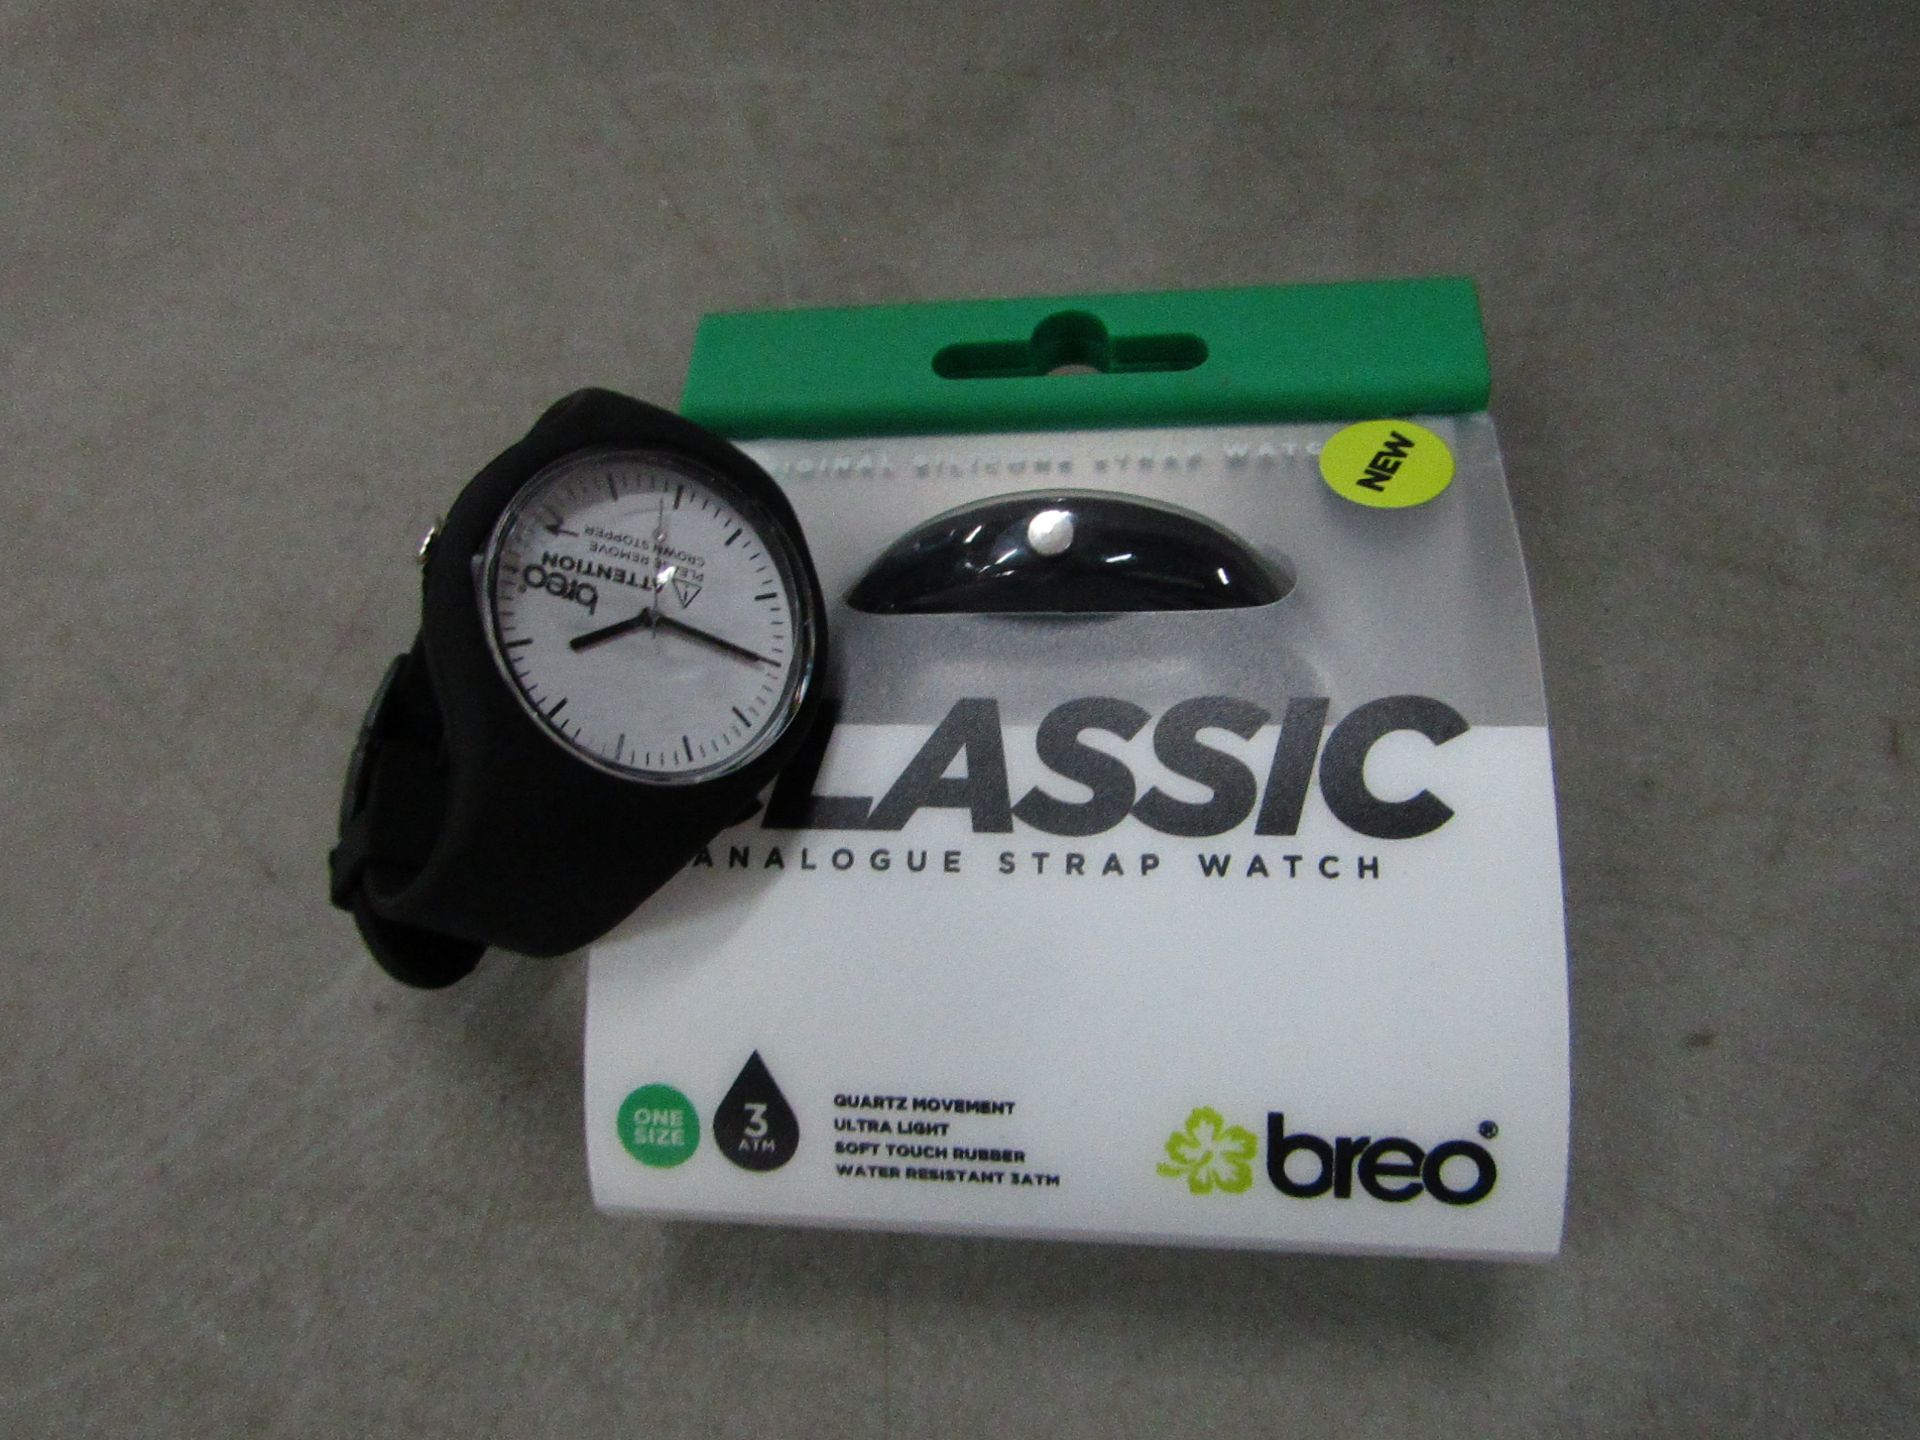 6 x Breo Analogue Strap Watches. Unused & Packaged